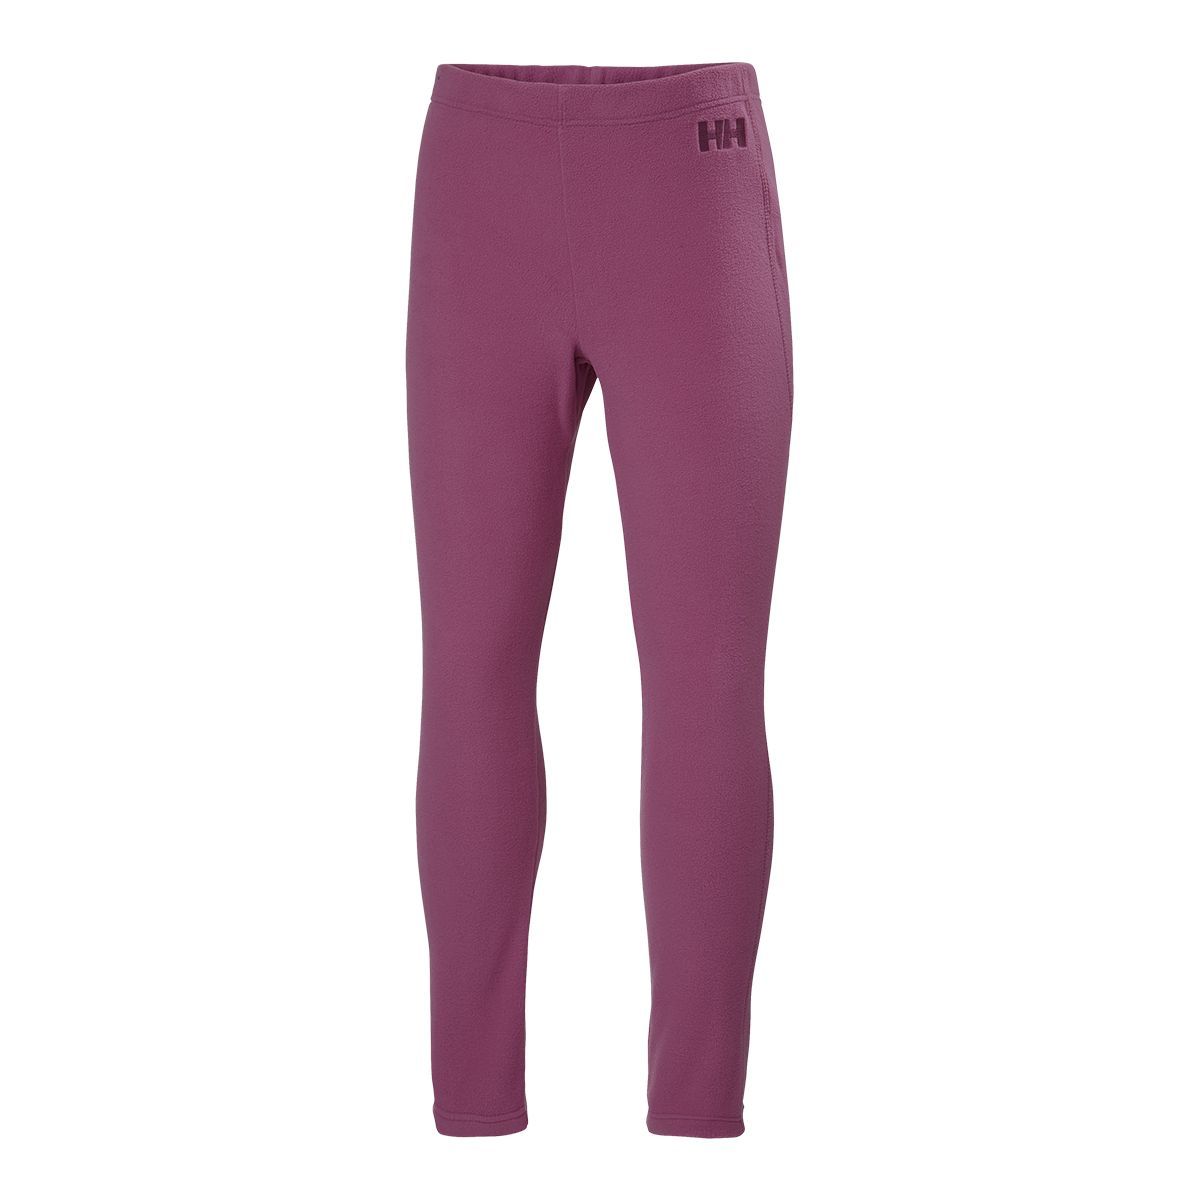 Helly Hansen Junior Daybreaker Tights: Active Comfort and Style